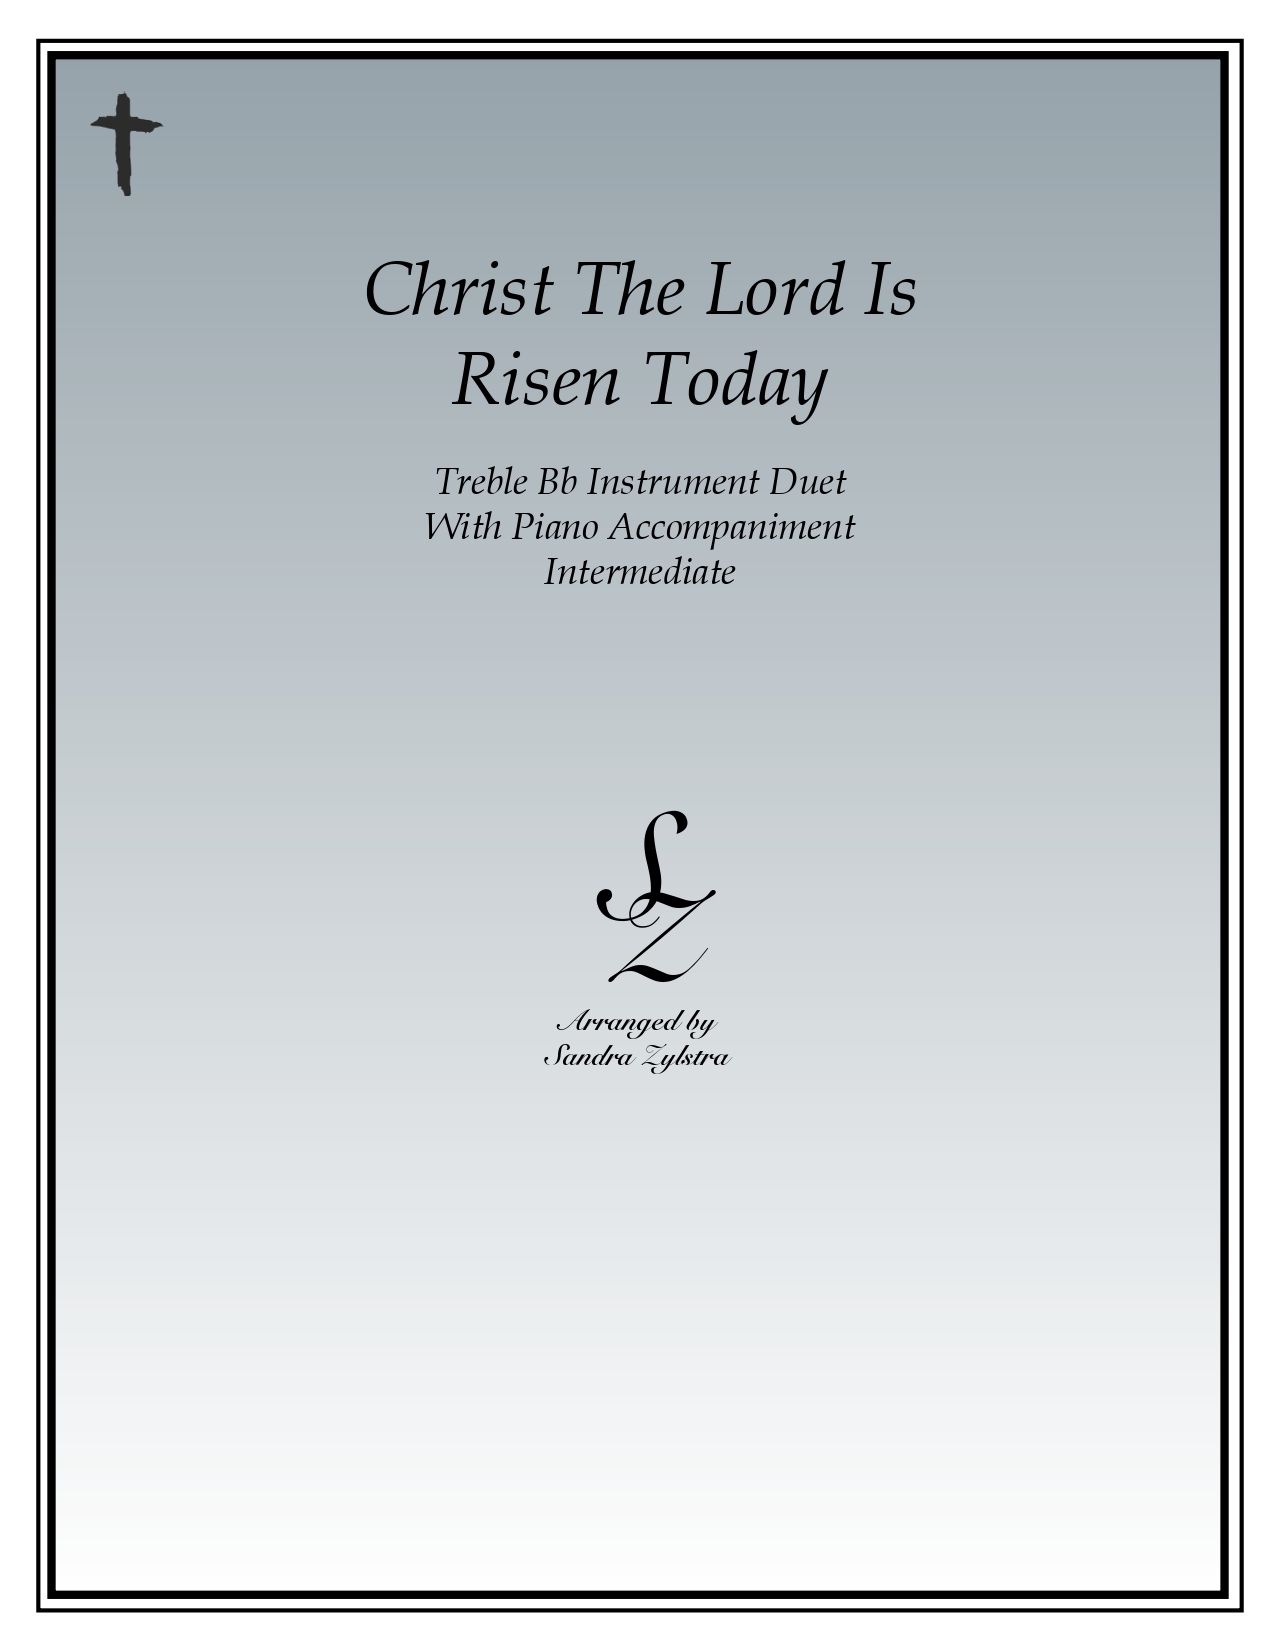 Christ The Lord Is Risen Today Bb instrument duet parts cover page 00011